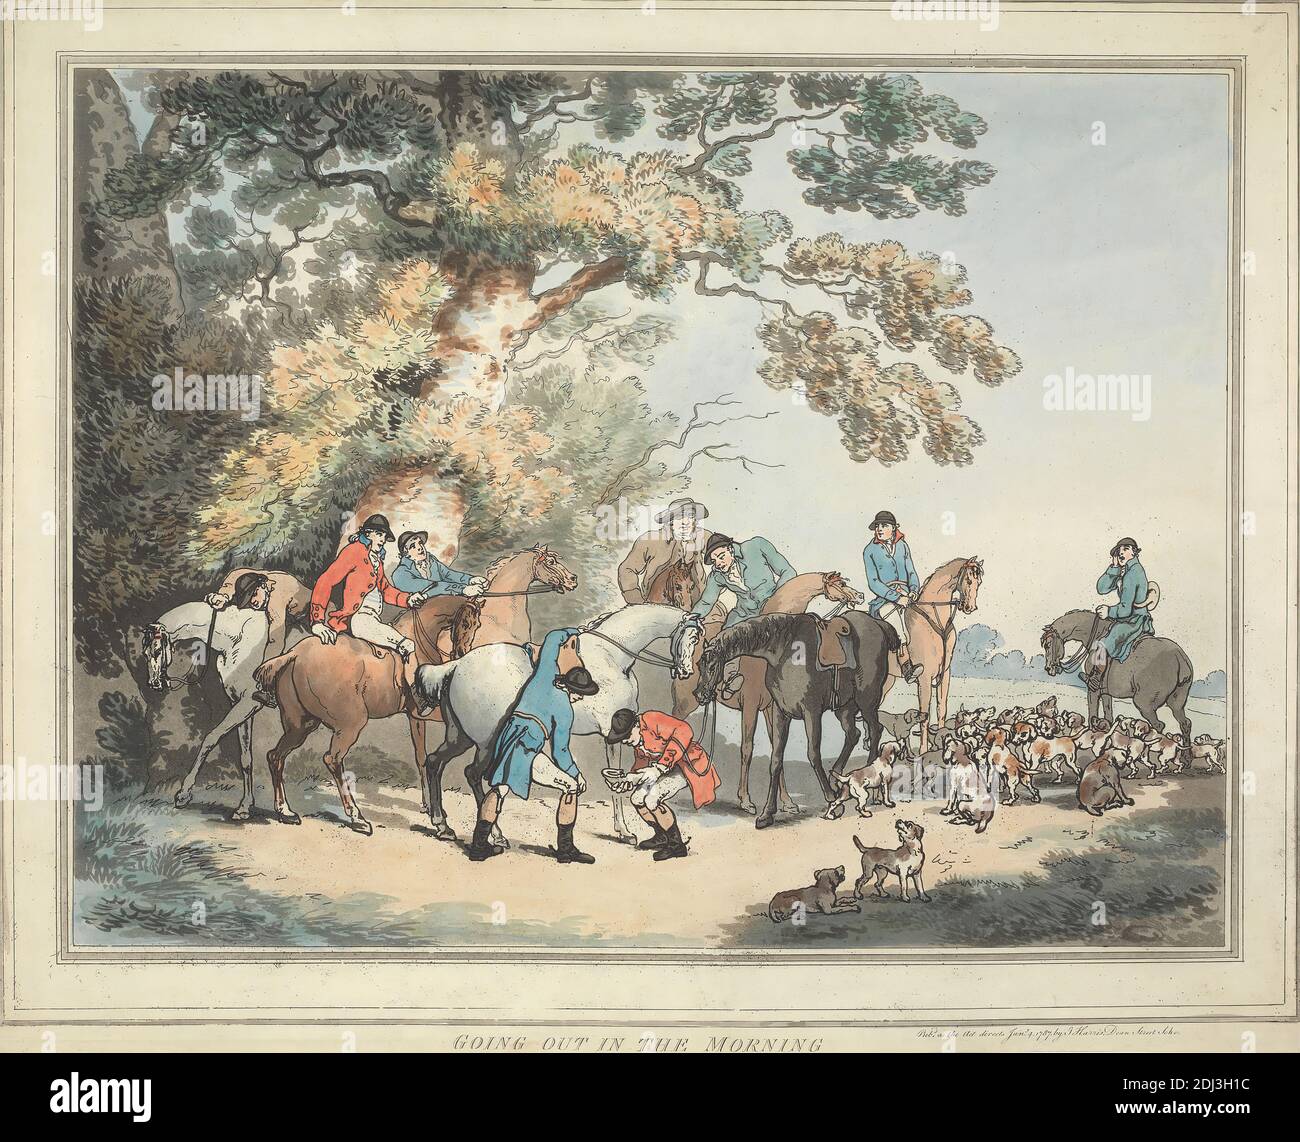 Fox-Hunting set of six: 1. Going Out in the Morning, Thomas Rowlandson, 1756–1827, British, after Thomas Rowlandson, 1756–1827, British, 1787, Aquatint, hand-colored, Sheet: 15 3/4 x 20 1/8in. (40 x 51.1cm Stock Photo